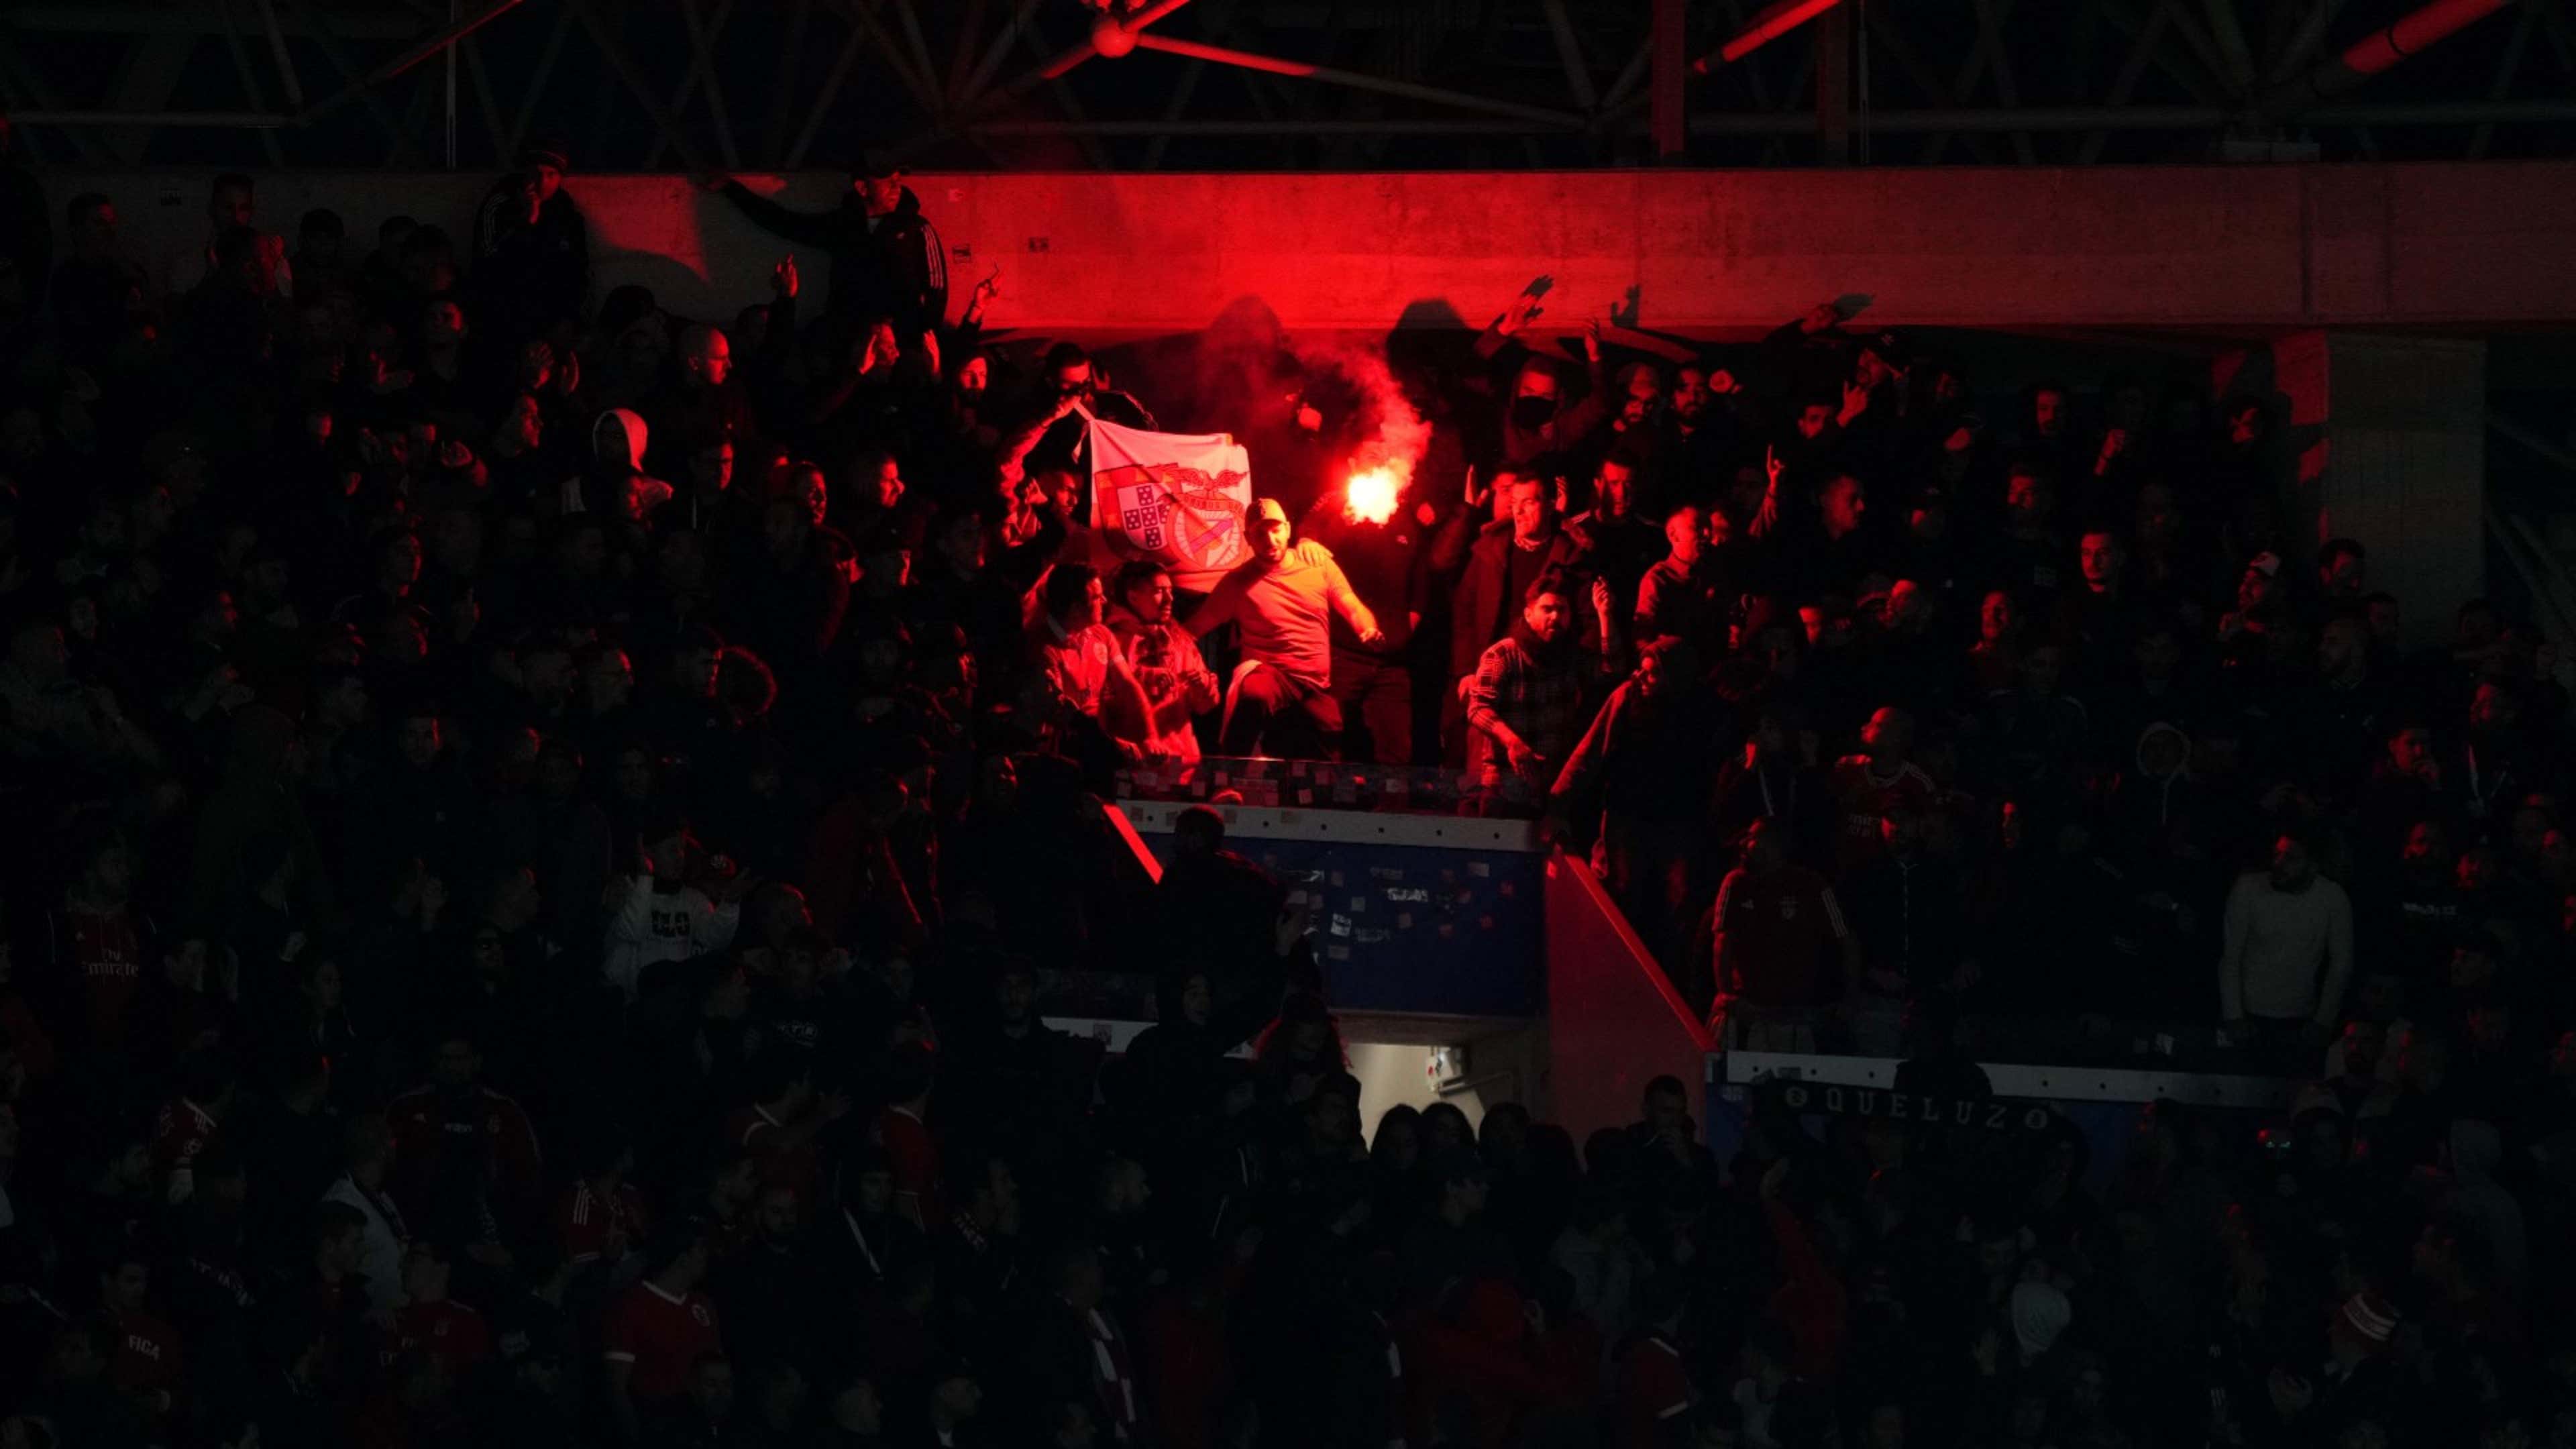 Benfica fans throw flares toward Sociedad supporters at Champions League  match